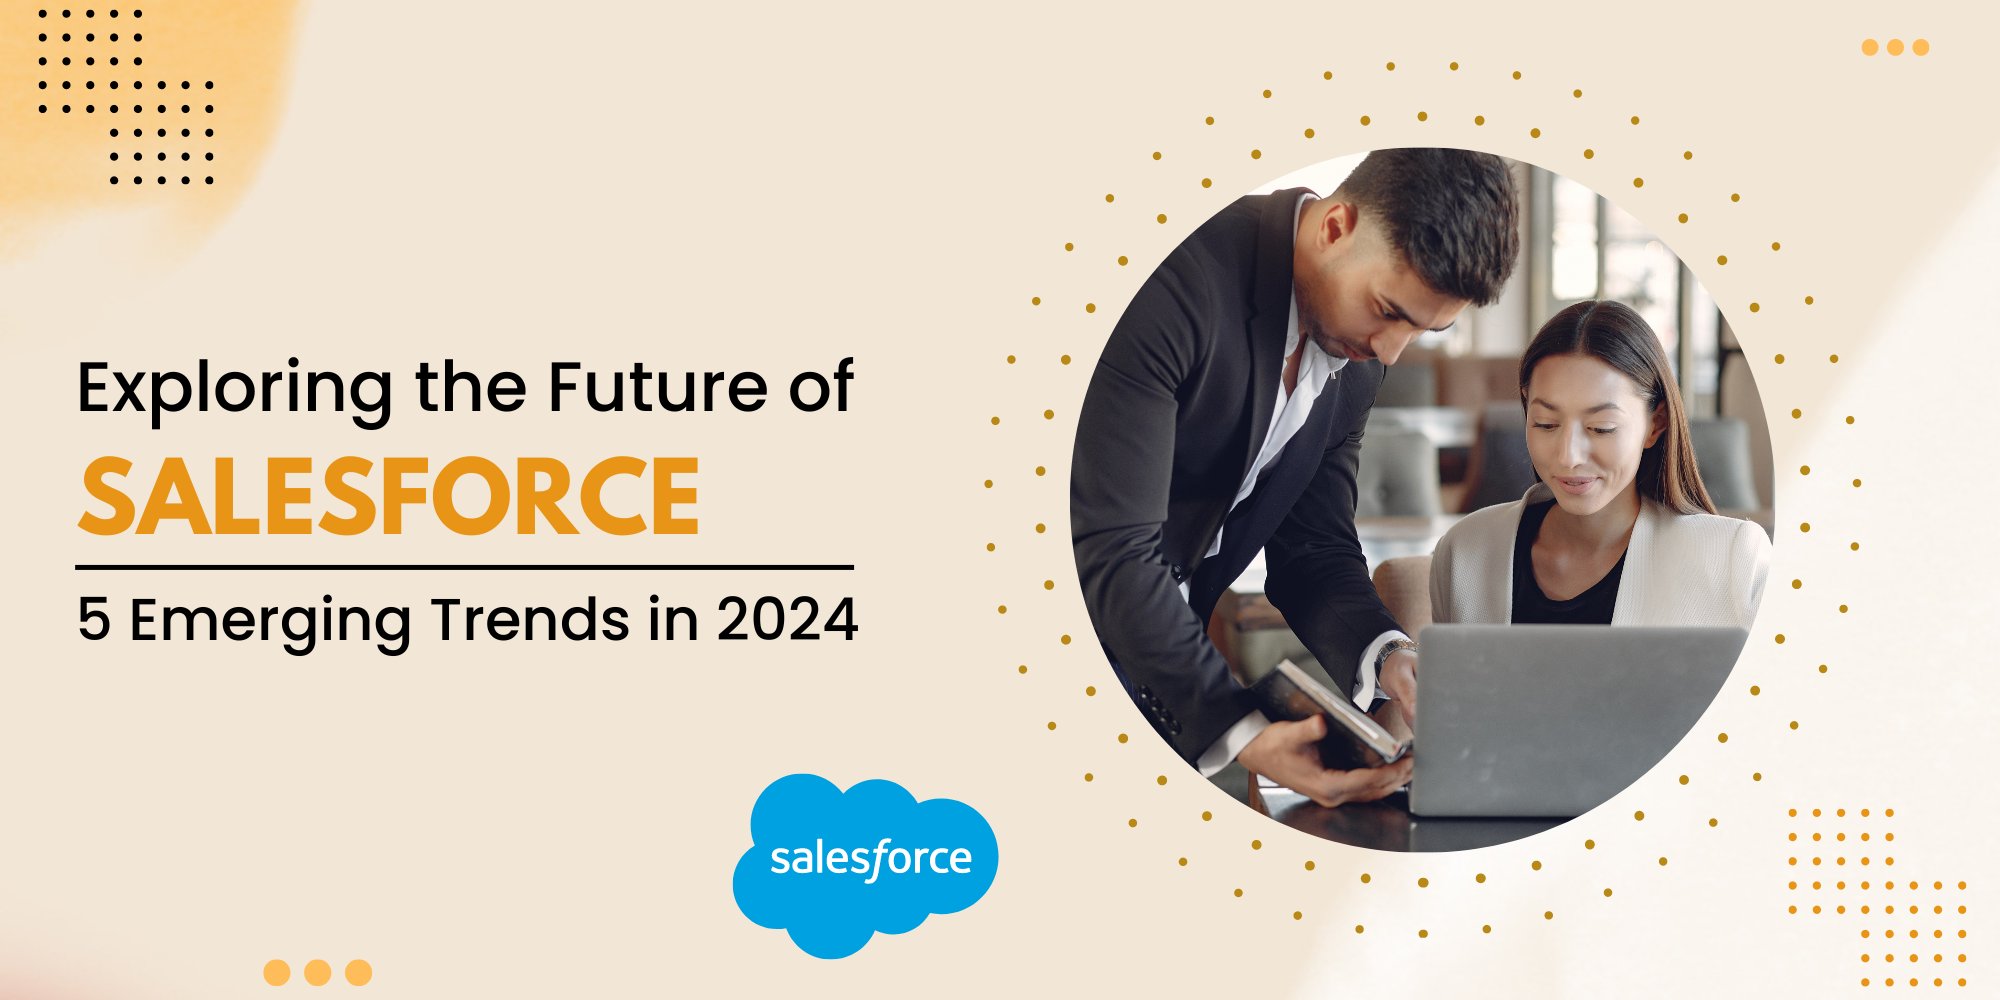 Exploring the Future of Salesforce: 5 Emerging Trends in 2024